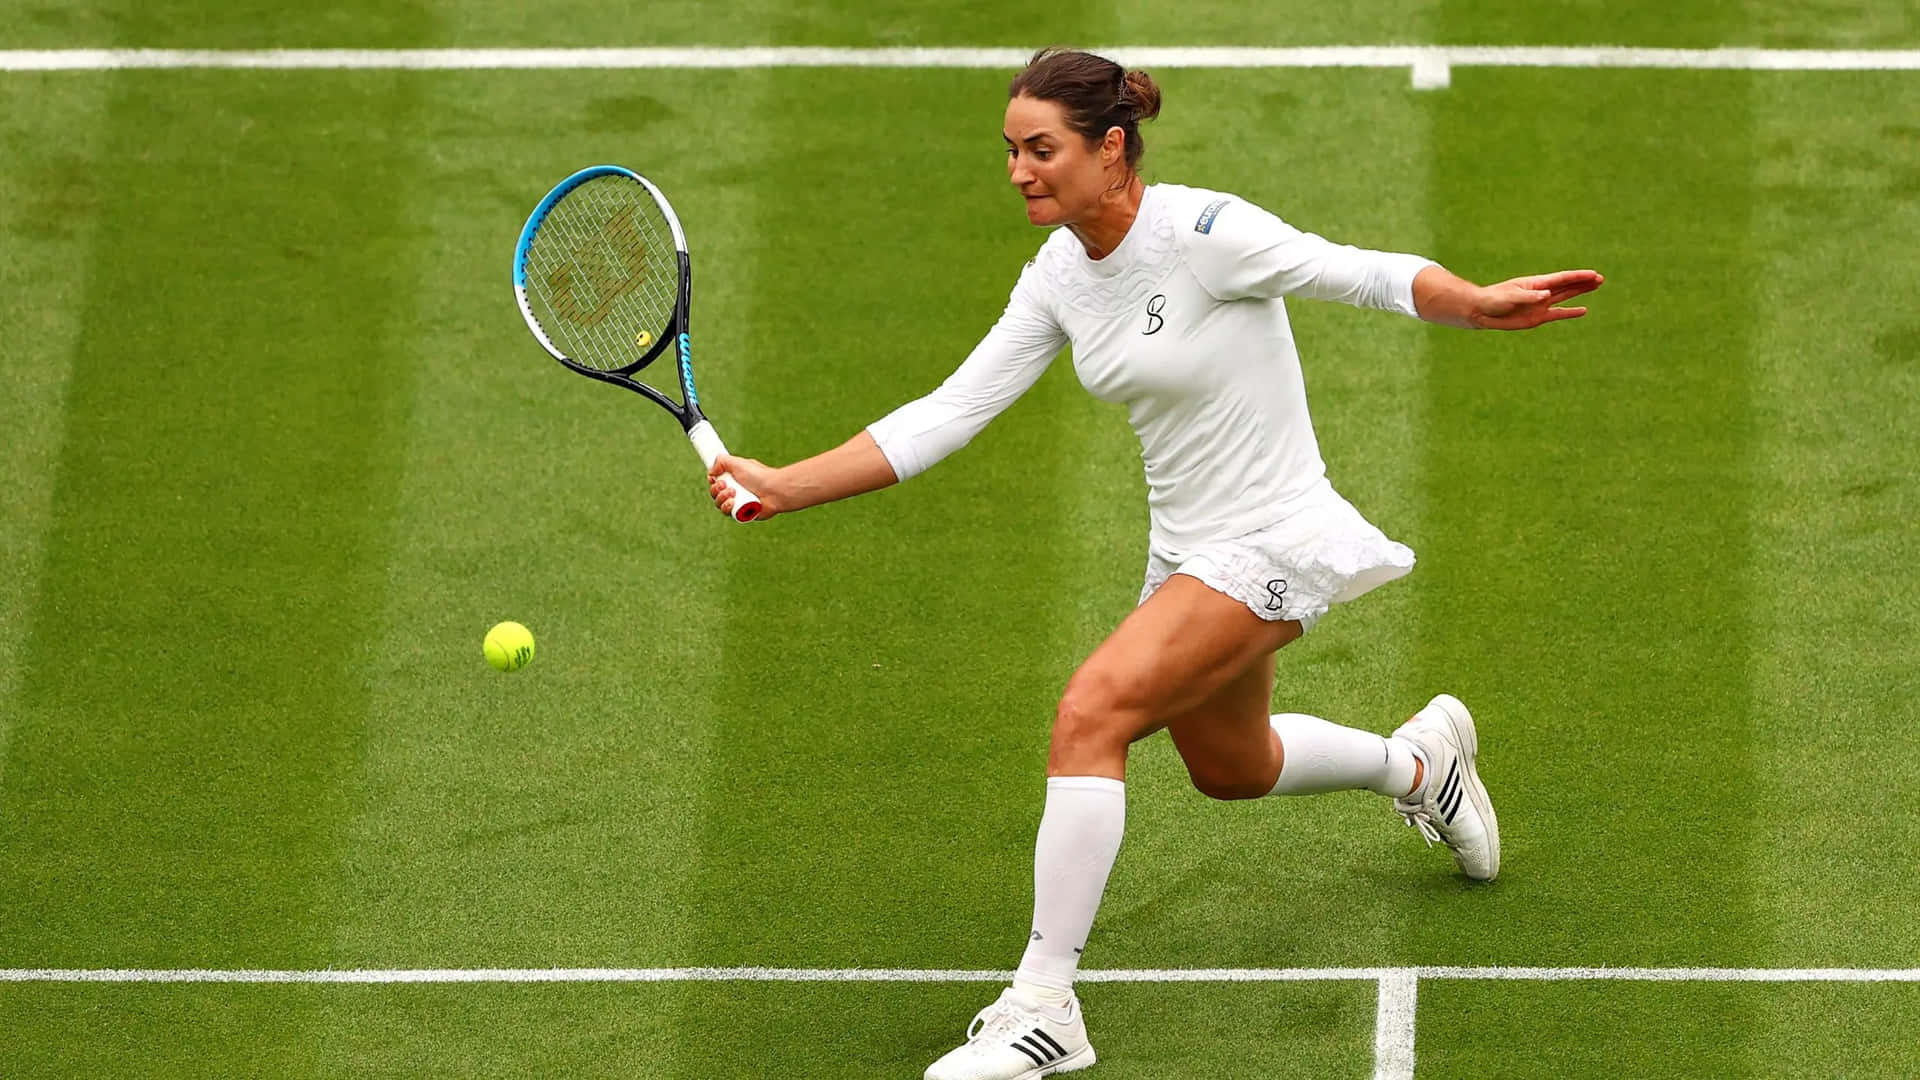 Monica Niculescu in action, wearing a white tennis outfit. Wallpaper